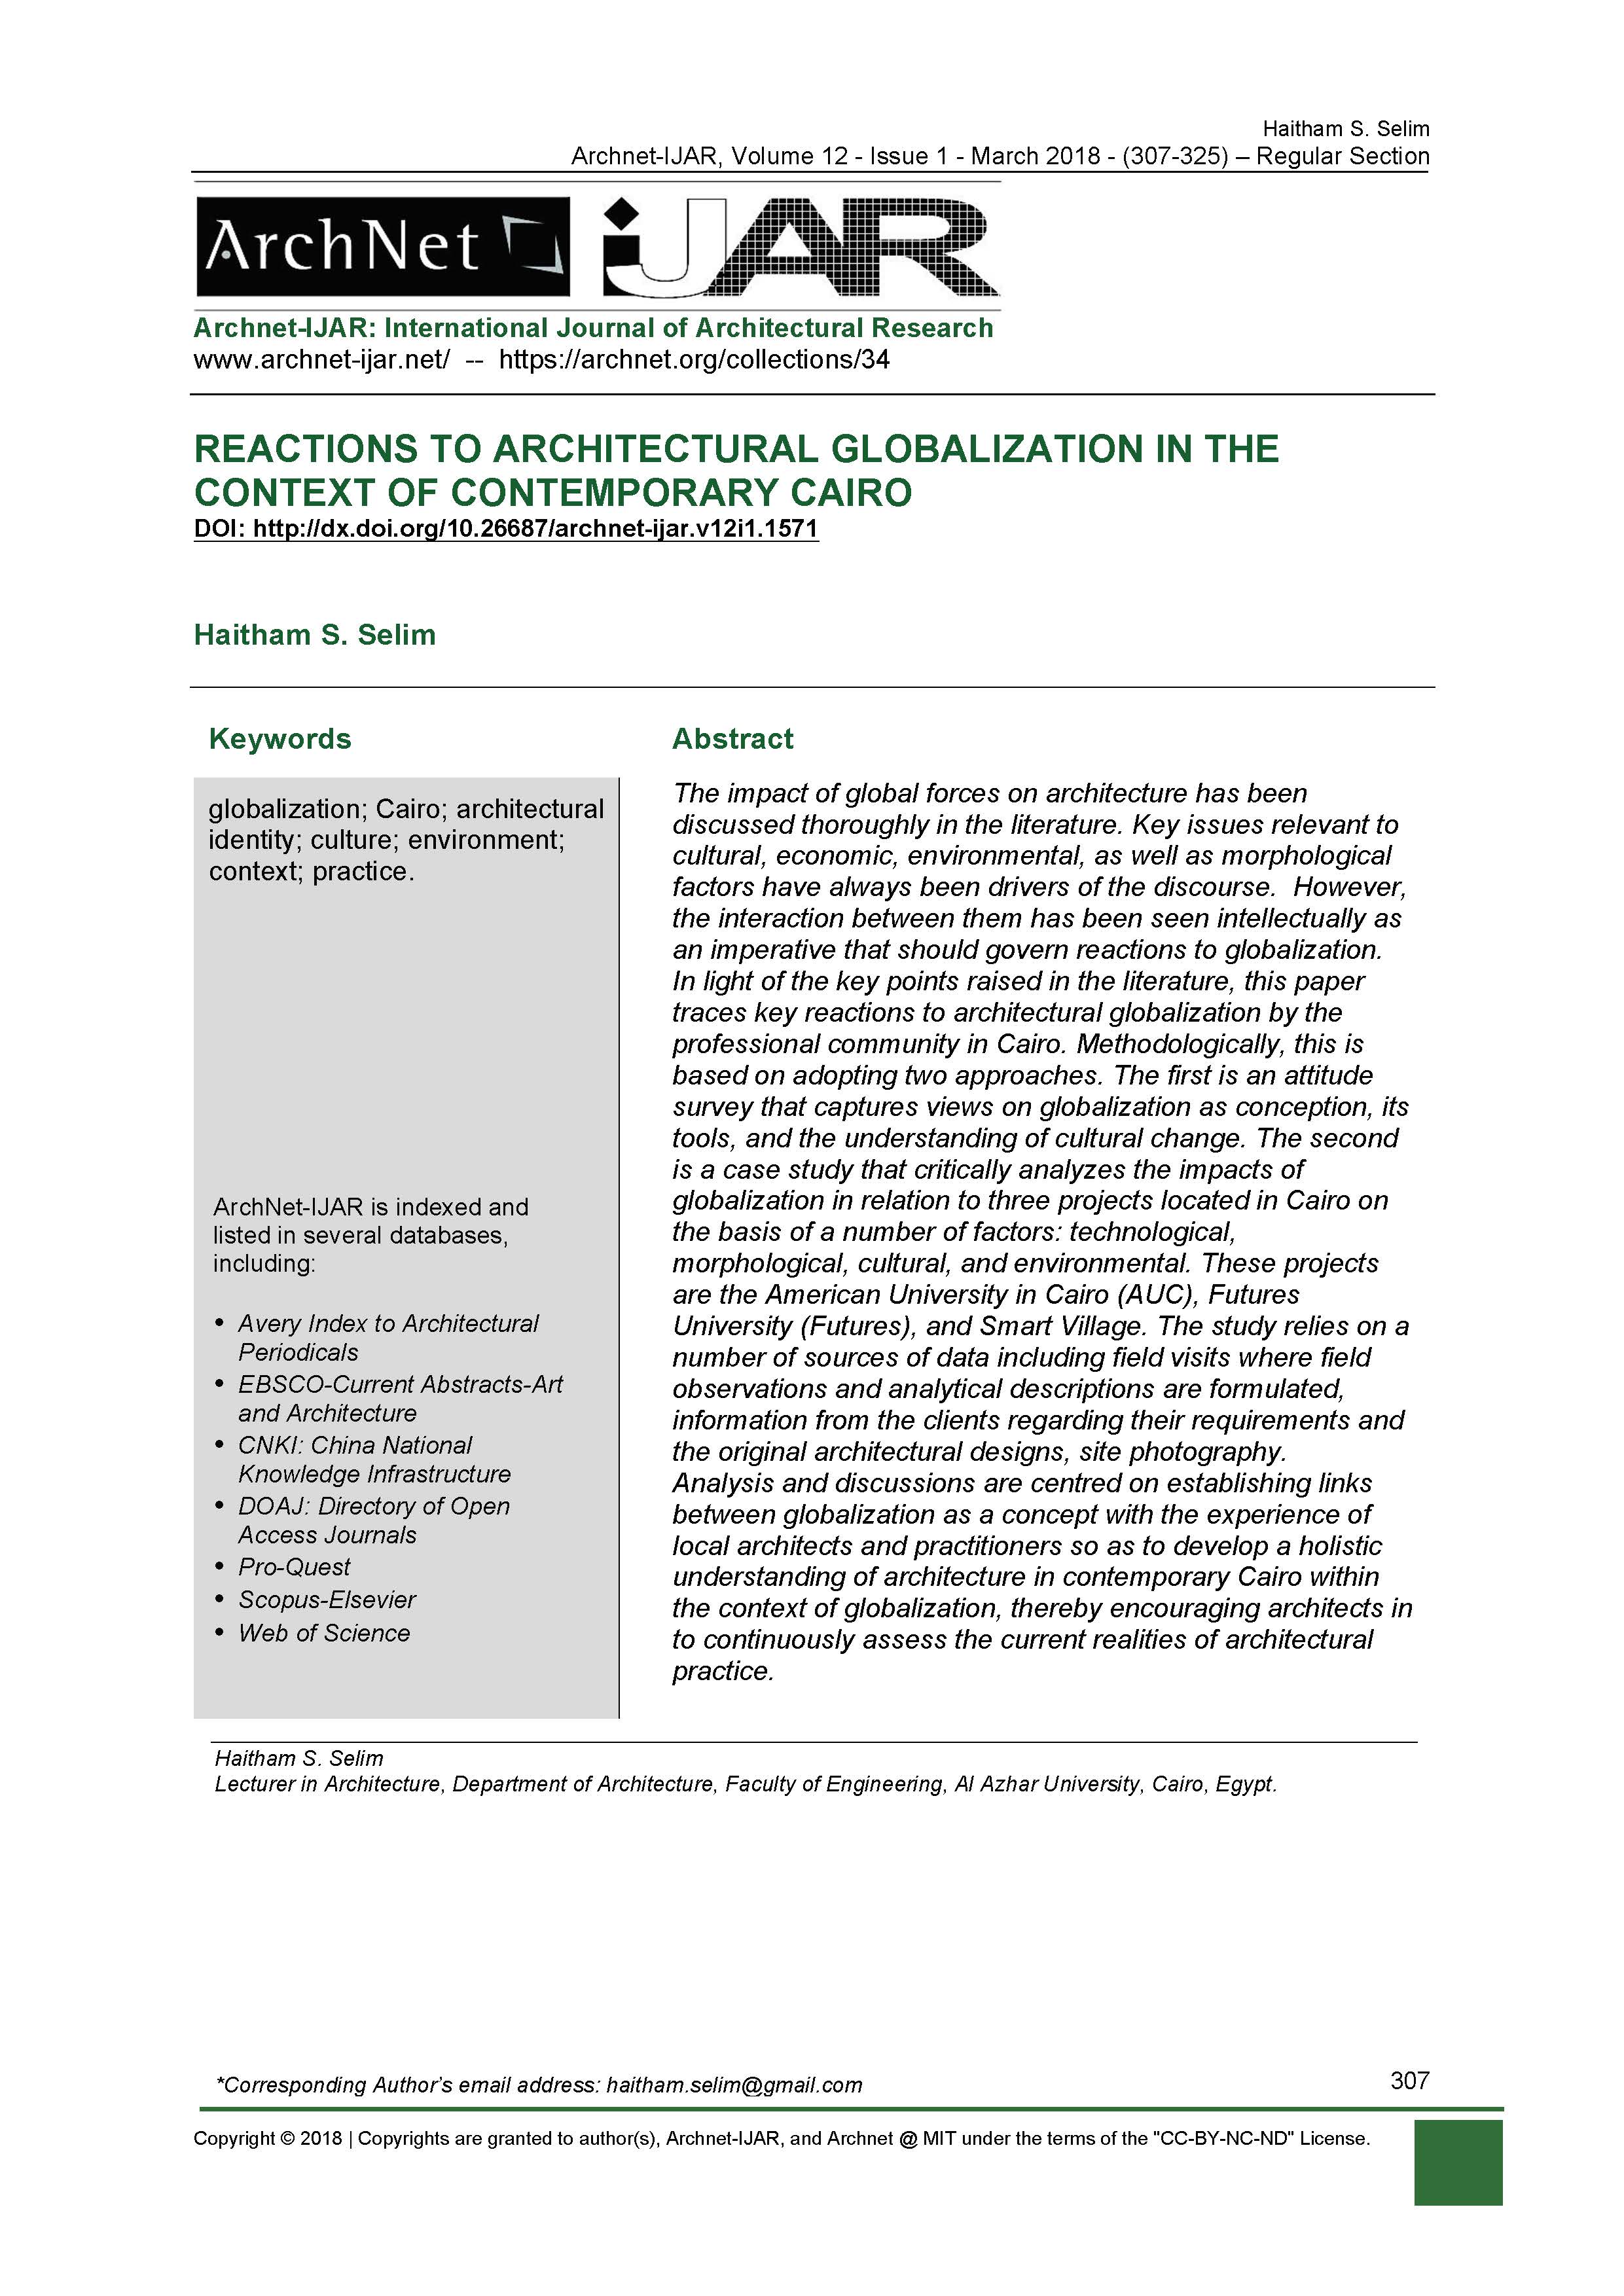 Reactions to Architectural Globalization in the Context of Contemporary Cairo